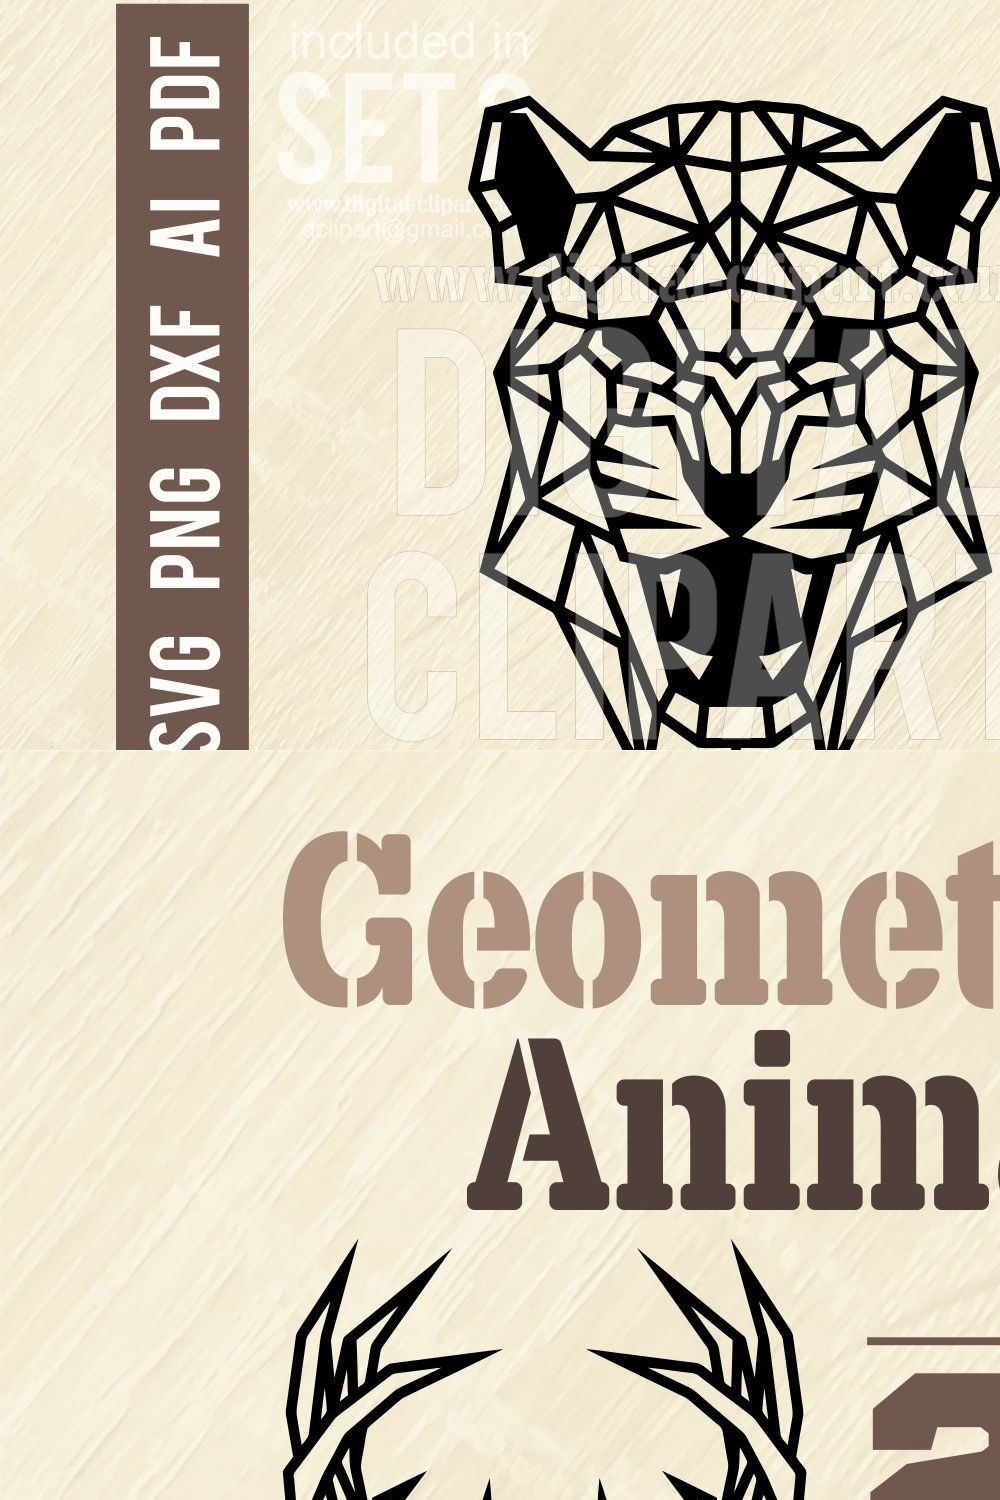 Cougar - Geometric Animals SVG File pinterest preview image.